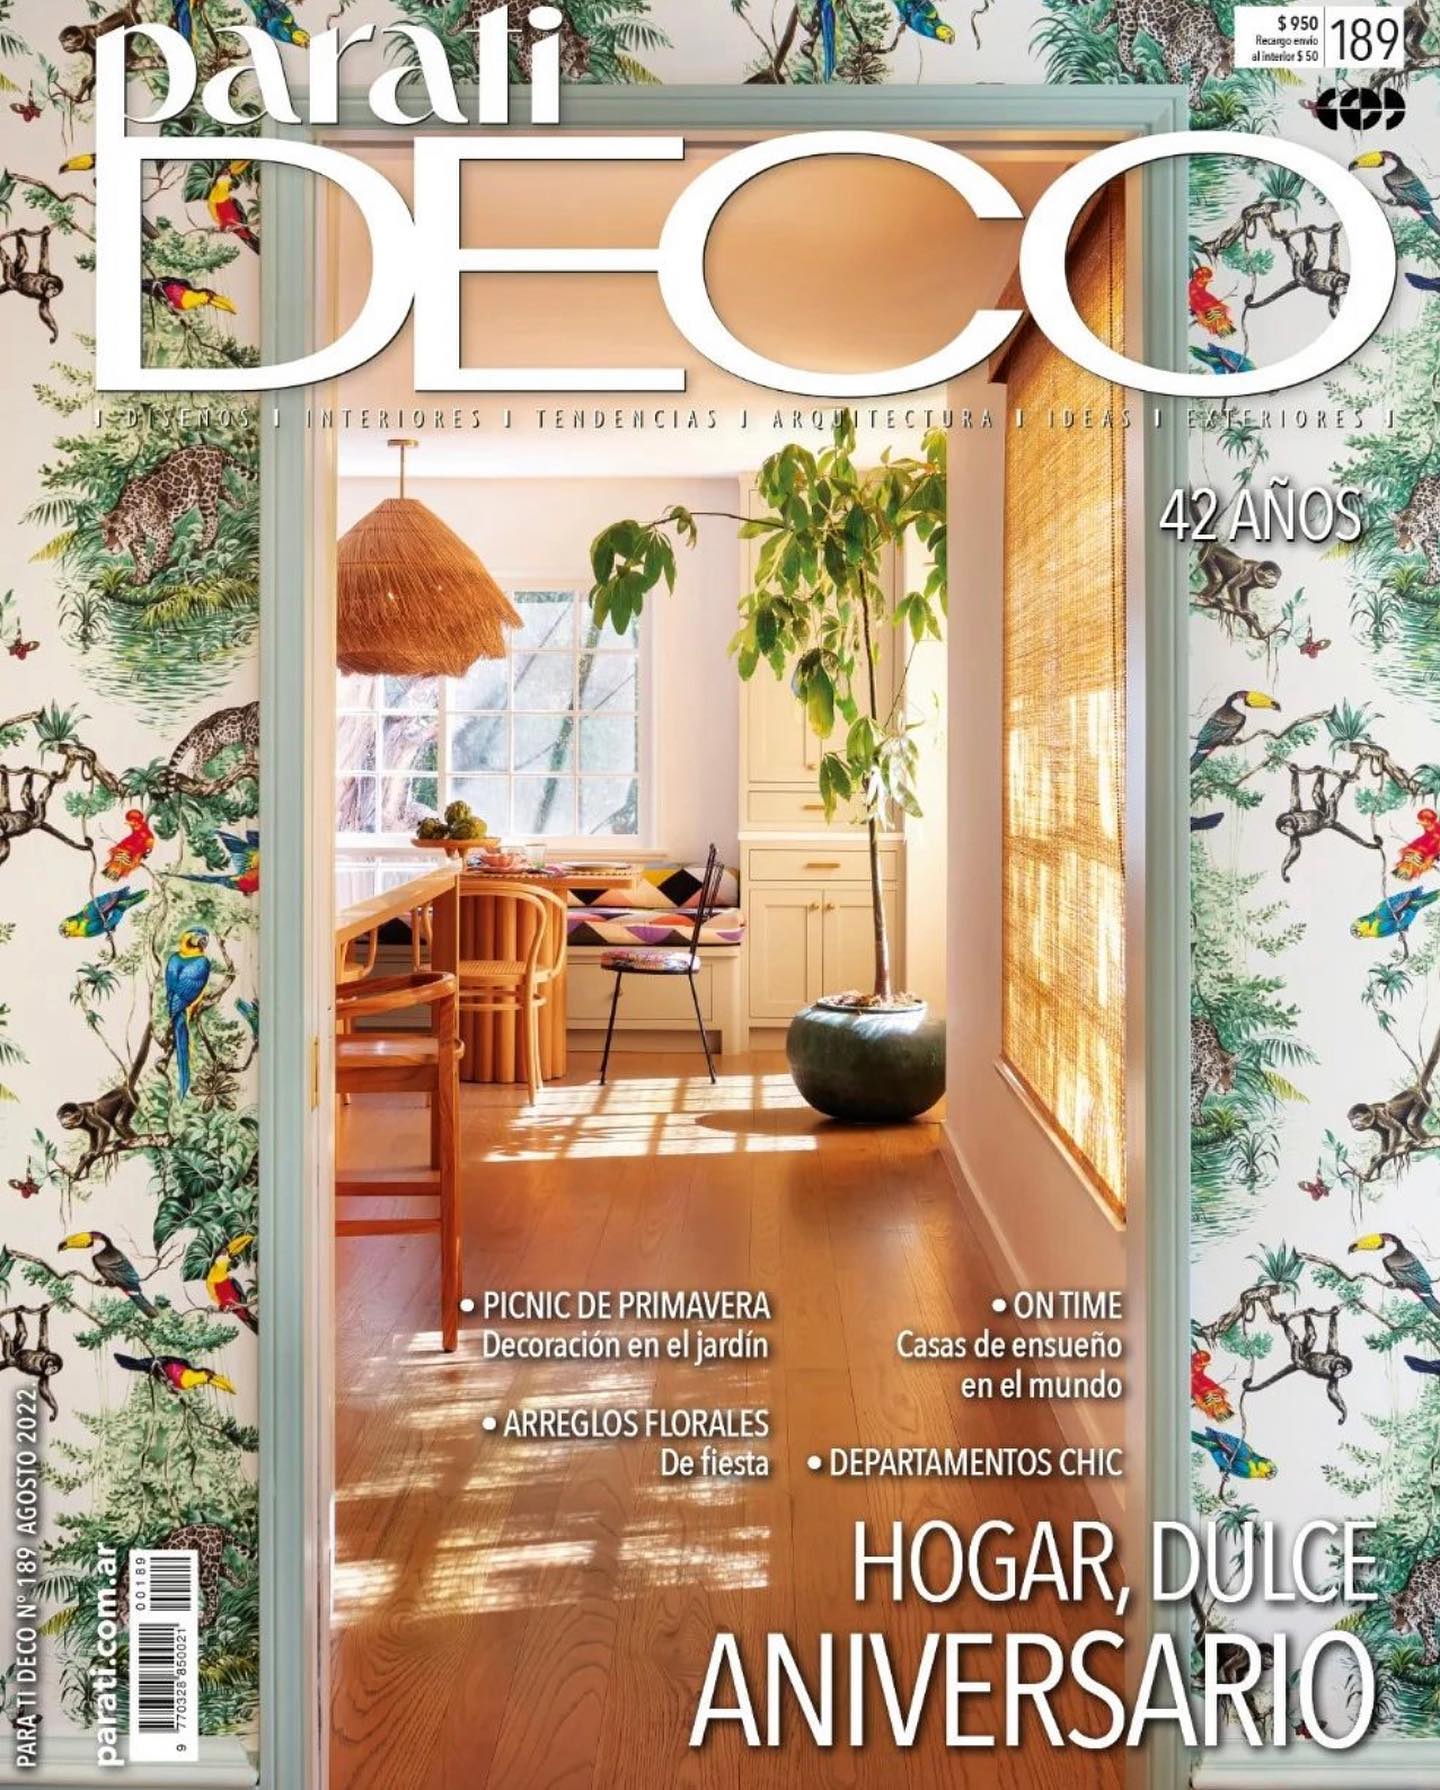 We are so humbled to be on the cover of @paratideco one of our go to interior design magazines In Argentina; forty second year anniversary issue.  Can’t wait to share the spread .@lagranadalosangeles Also excited to announce our upcoming project with @pondderose 🌴🌴🌴🌴🌴🌴 #thepondestate Thank you @marianasoulages  Design: LALA reimagined  Photography: @robertogarcia.photography  #interiordesign #interior #art #pierrefrey #hermeswallpaper #argentinadesign #paratideco #decorateurinterieur #ladesigner #lalareimagined #architecturaldigest #farrowandball